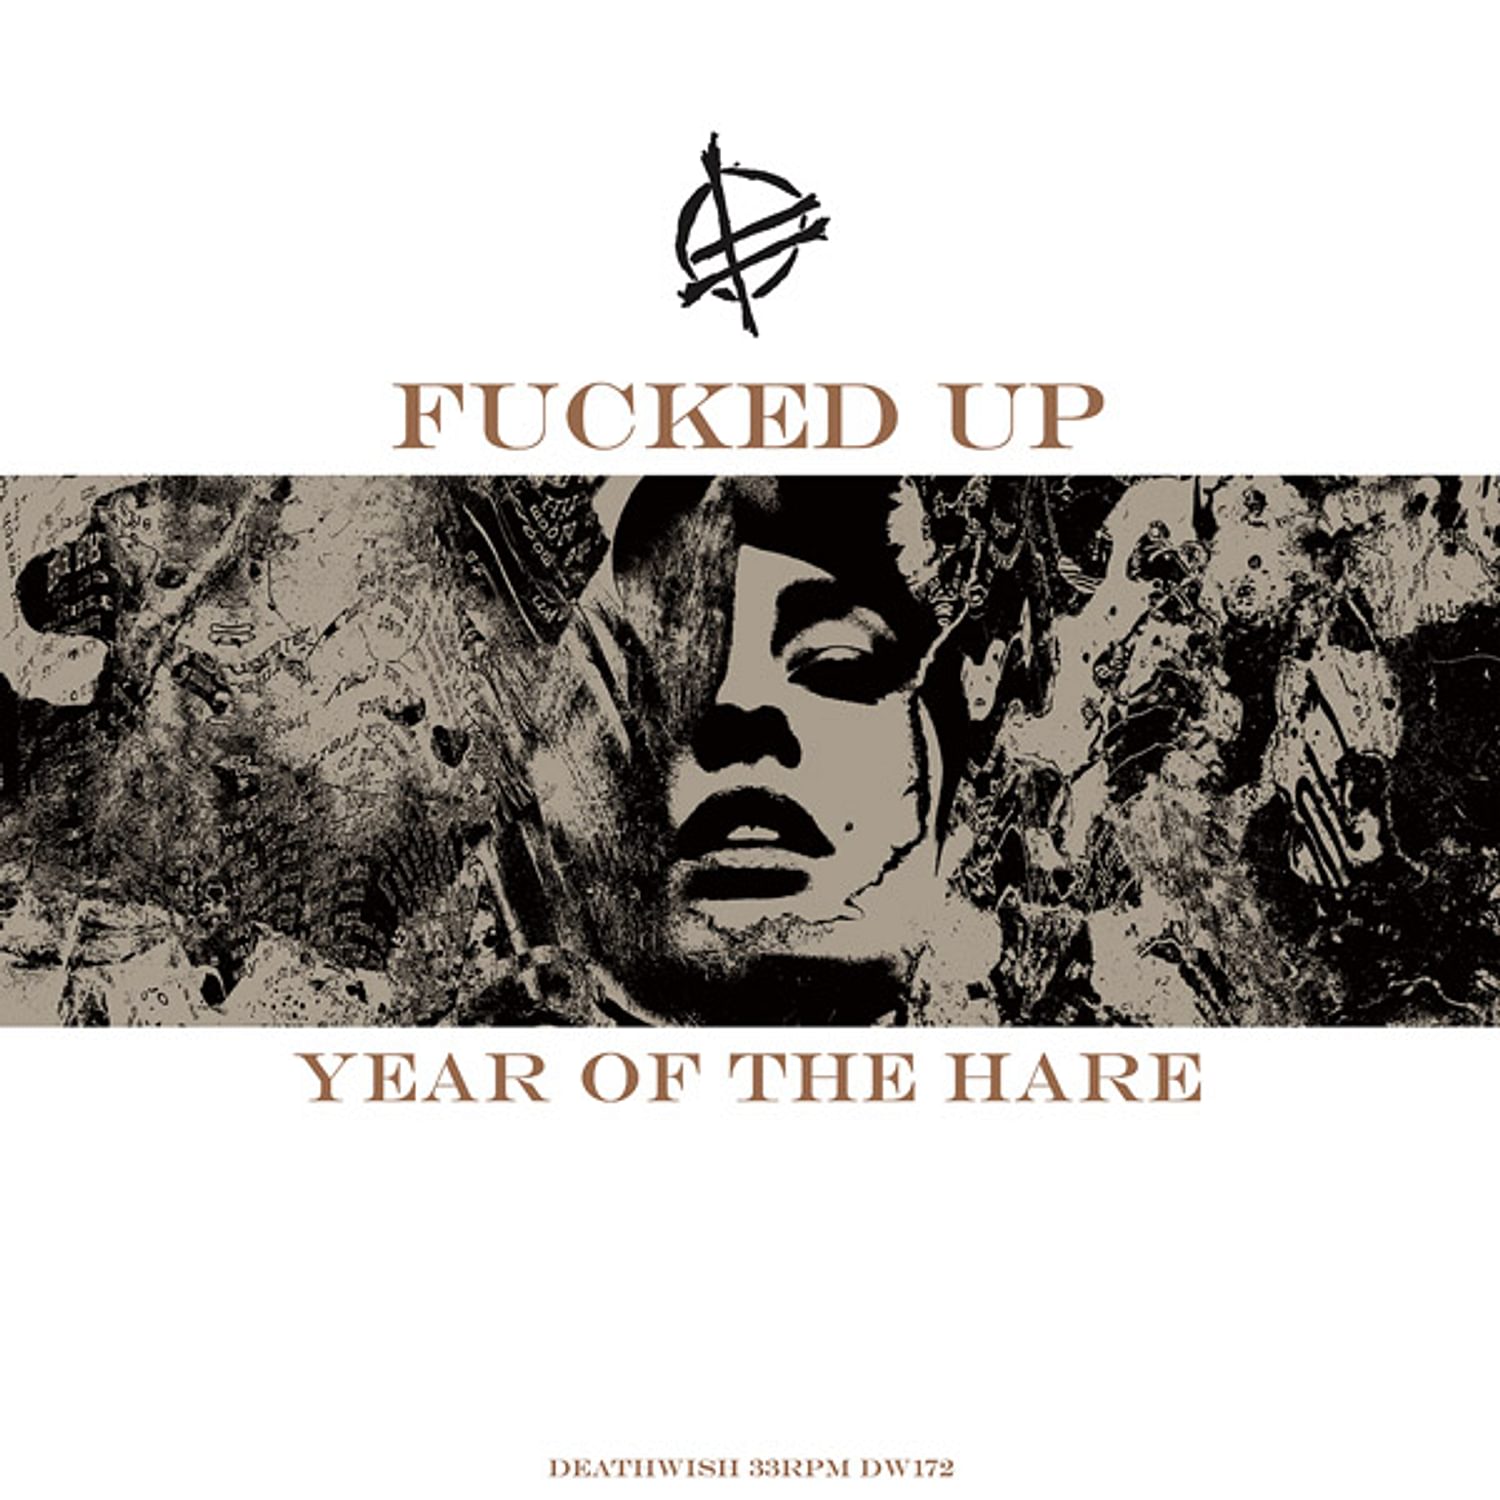 Fucked Up announce ‘Year of the Hare’ EP